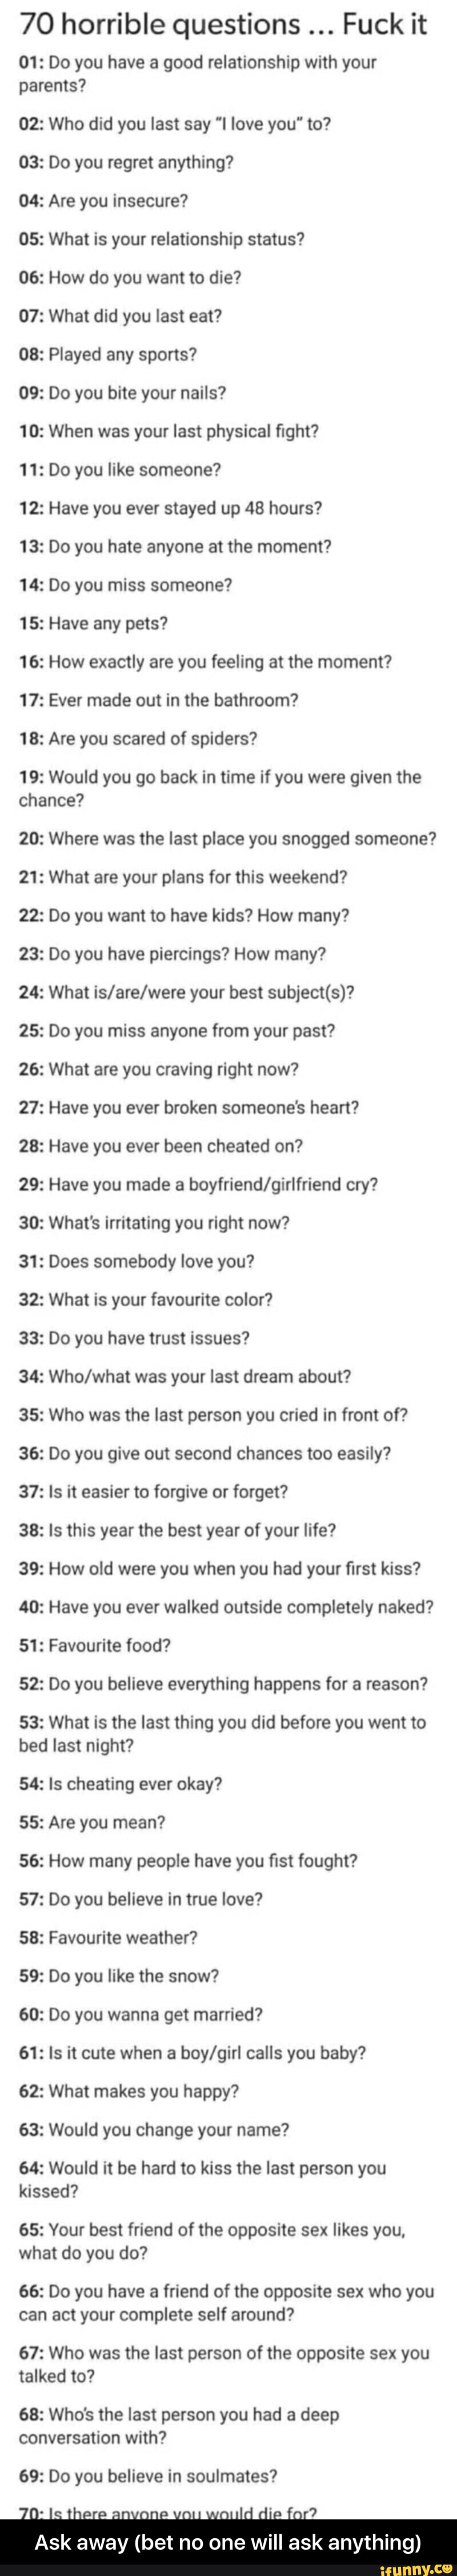 High Quality 70 questions Blank Meme Template